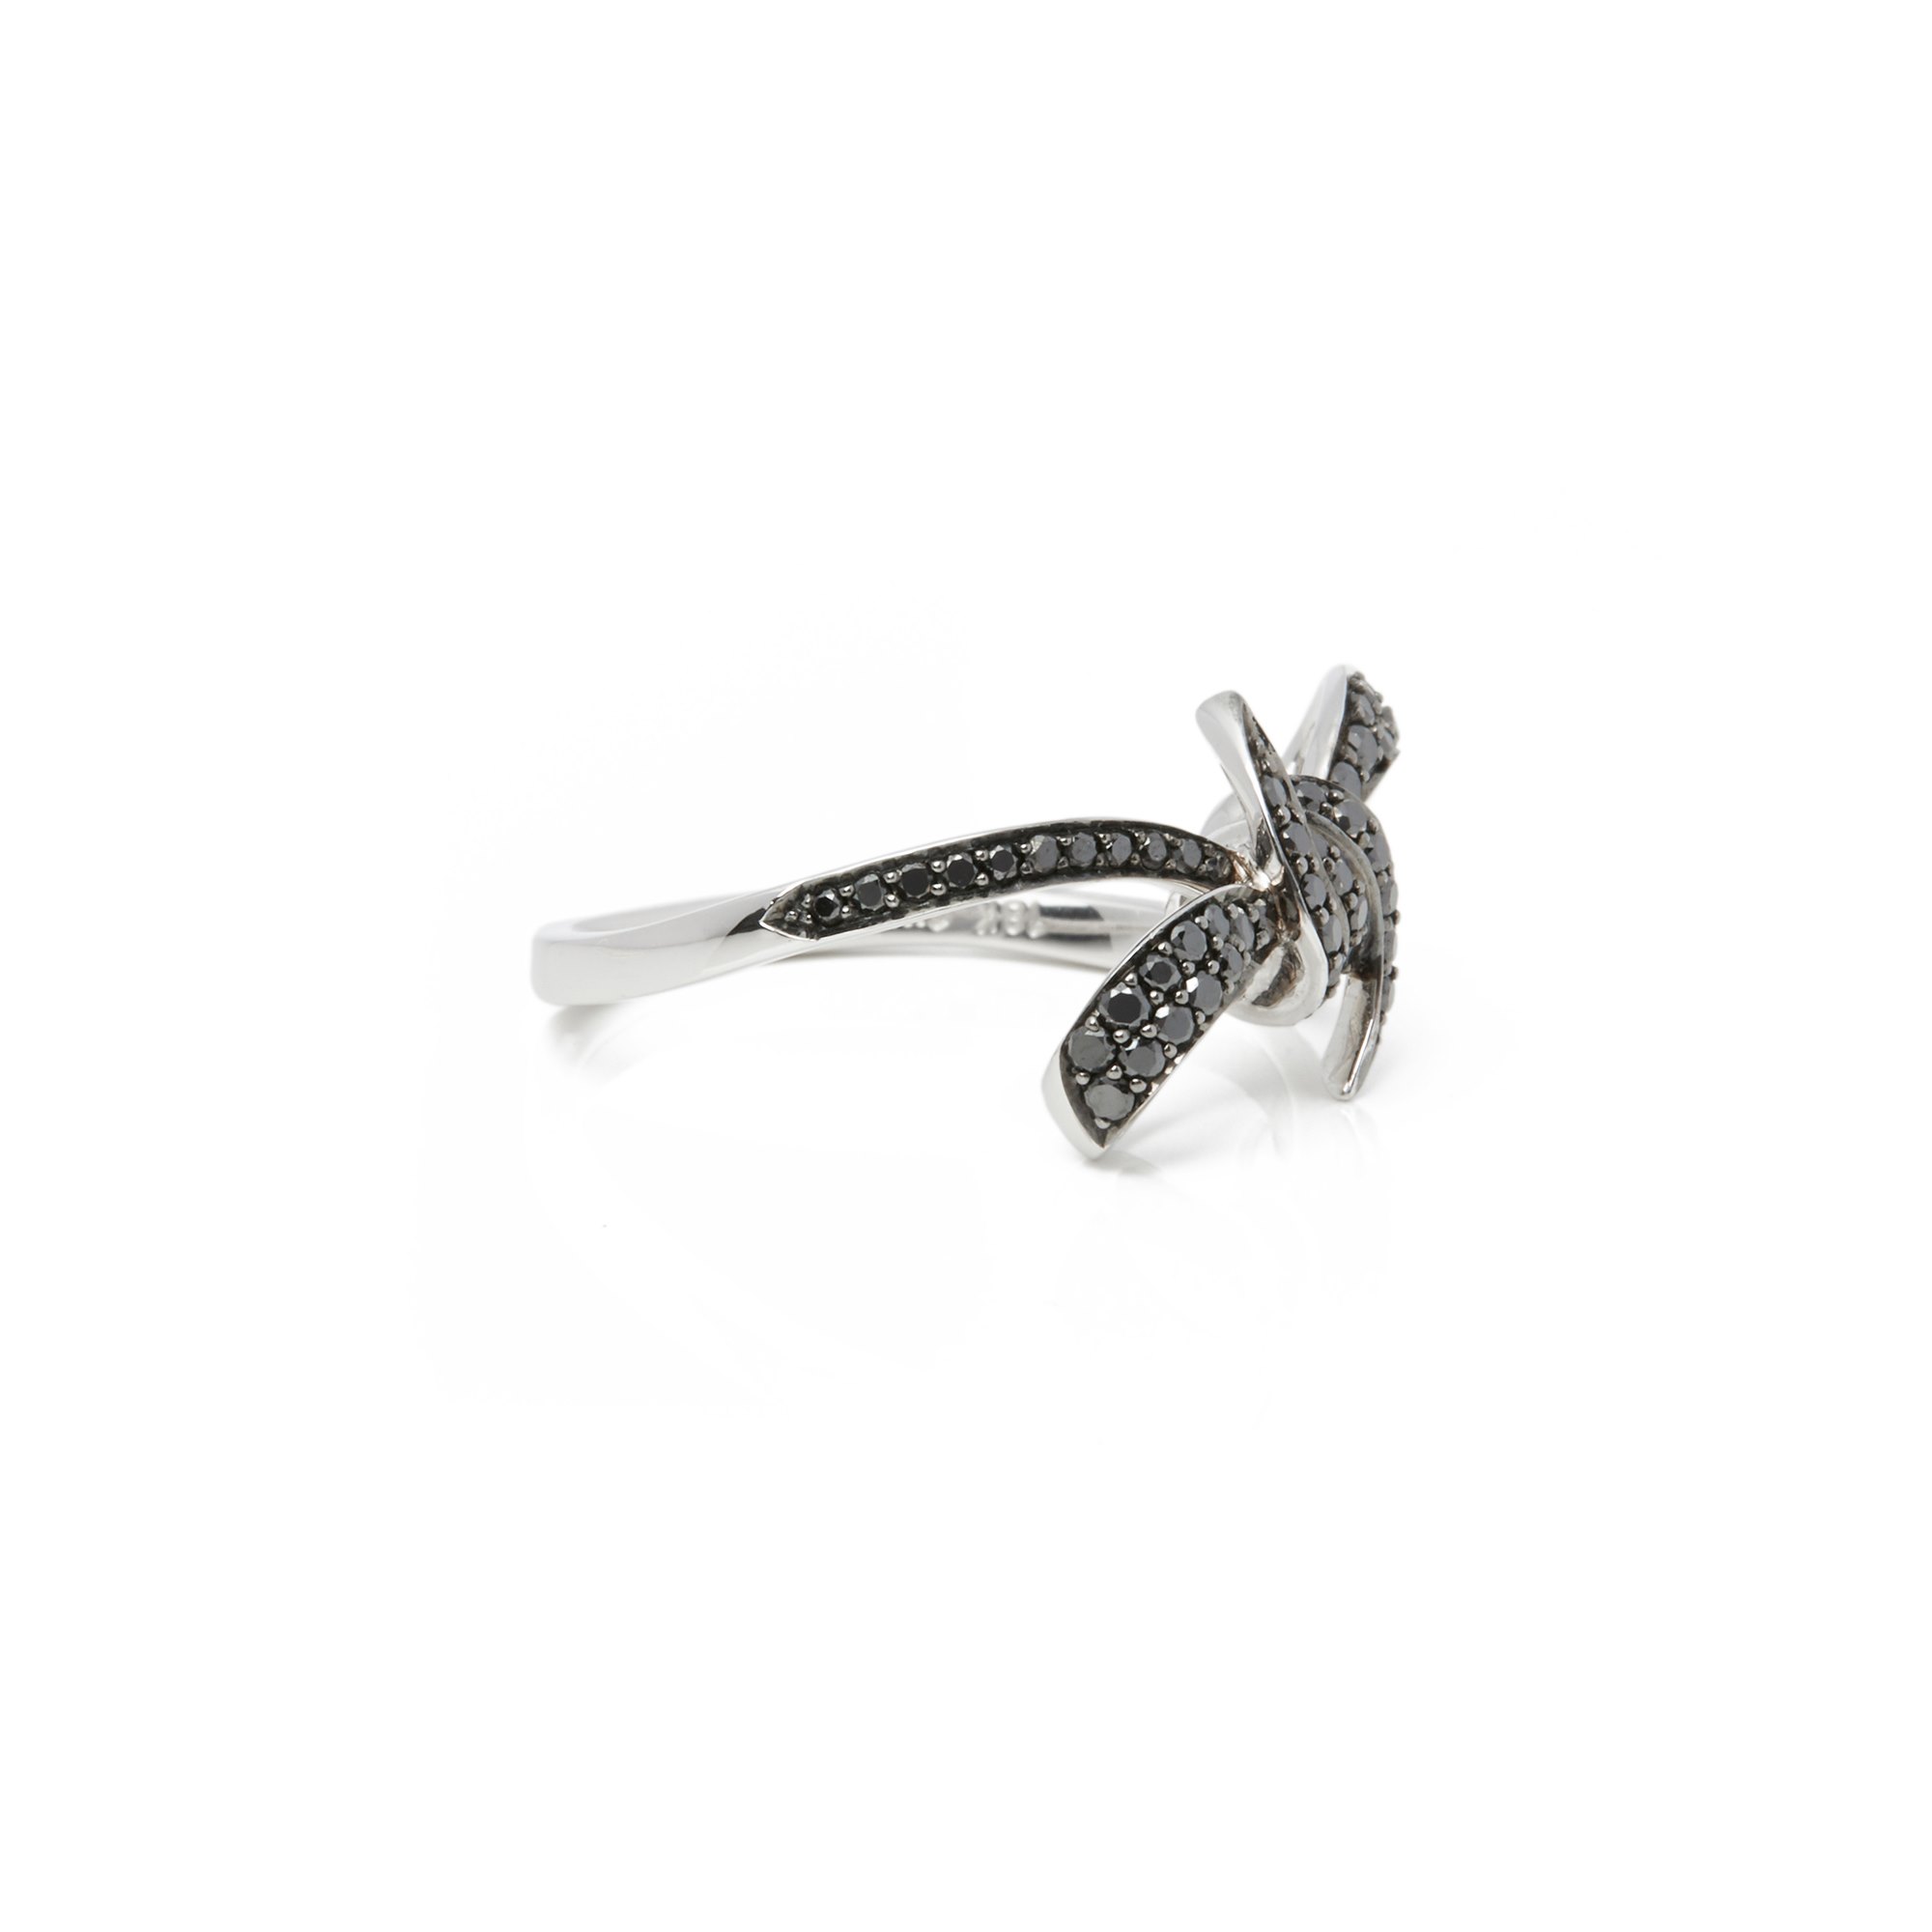 Stephen Webster Forget Me Knot 18ct White Gold Black Diamond Small Bow Ring